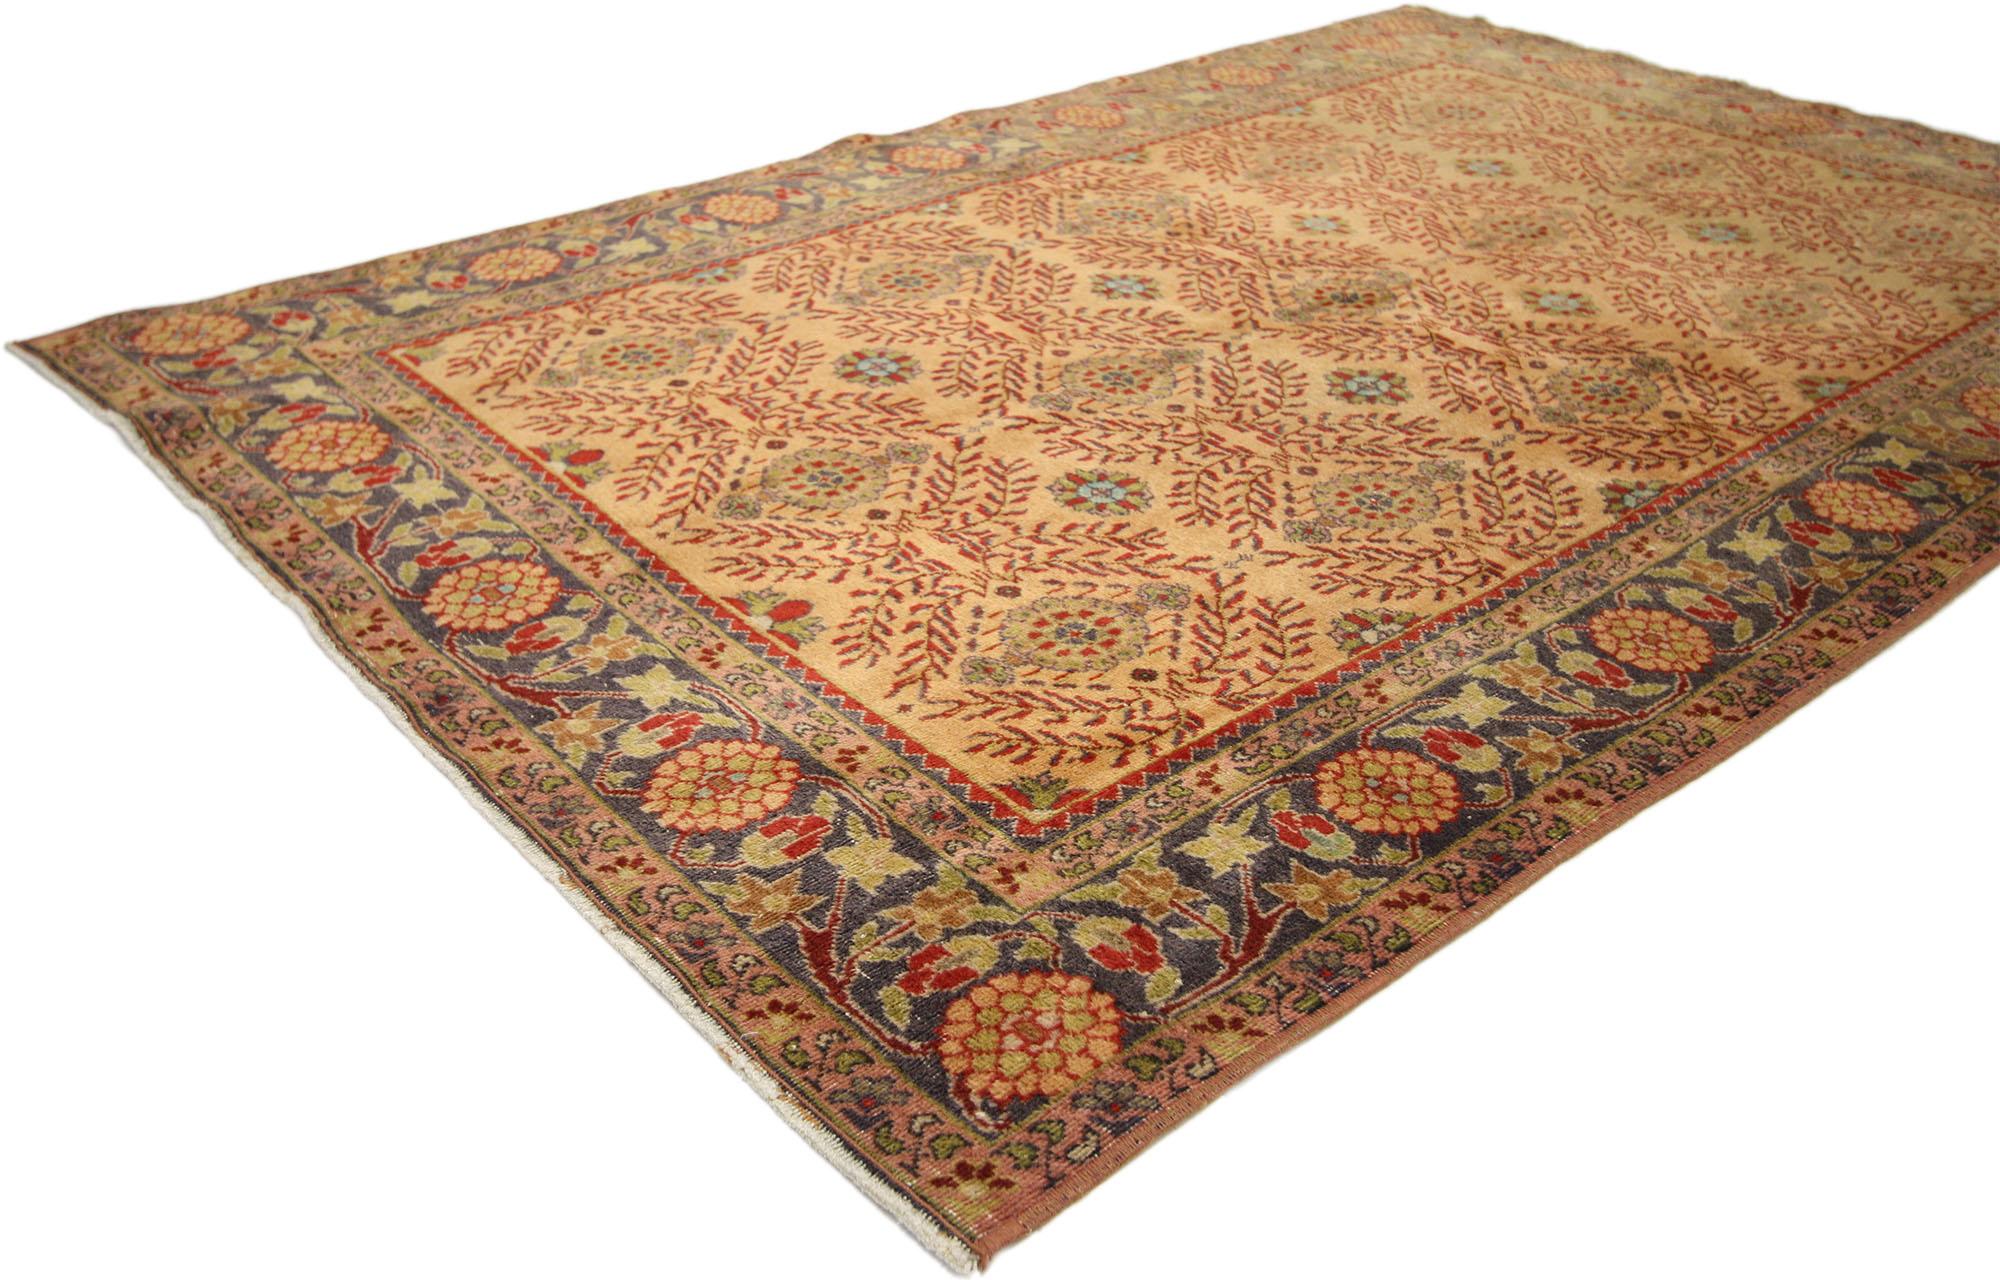 20th Century Vintage Turkish Oushak Rug with Rustic Spanish Style For Sale